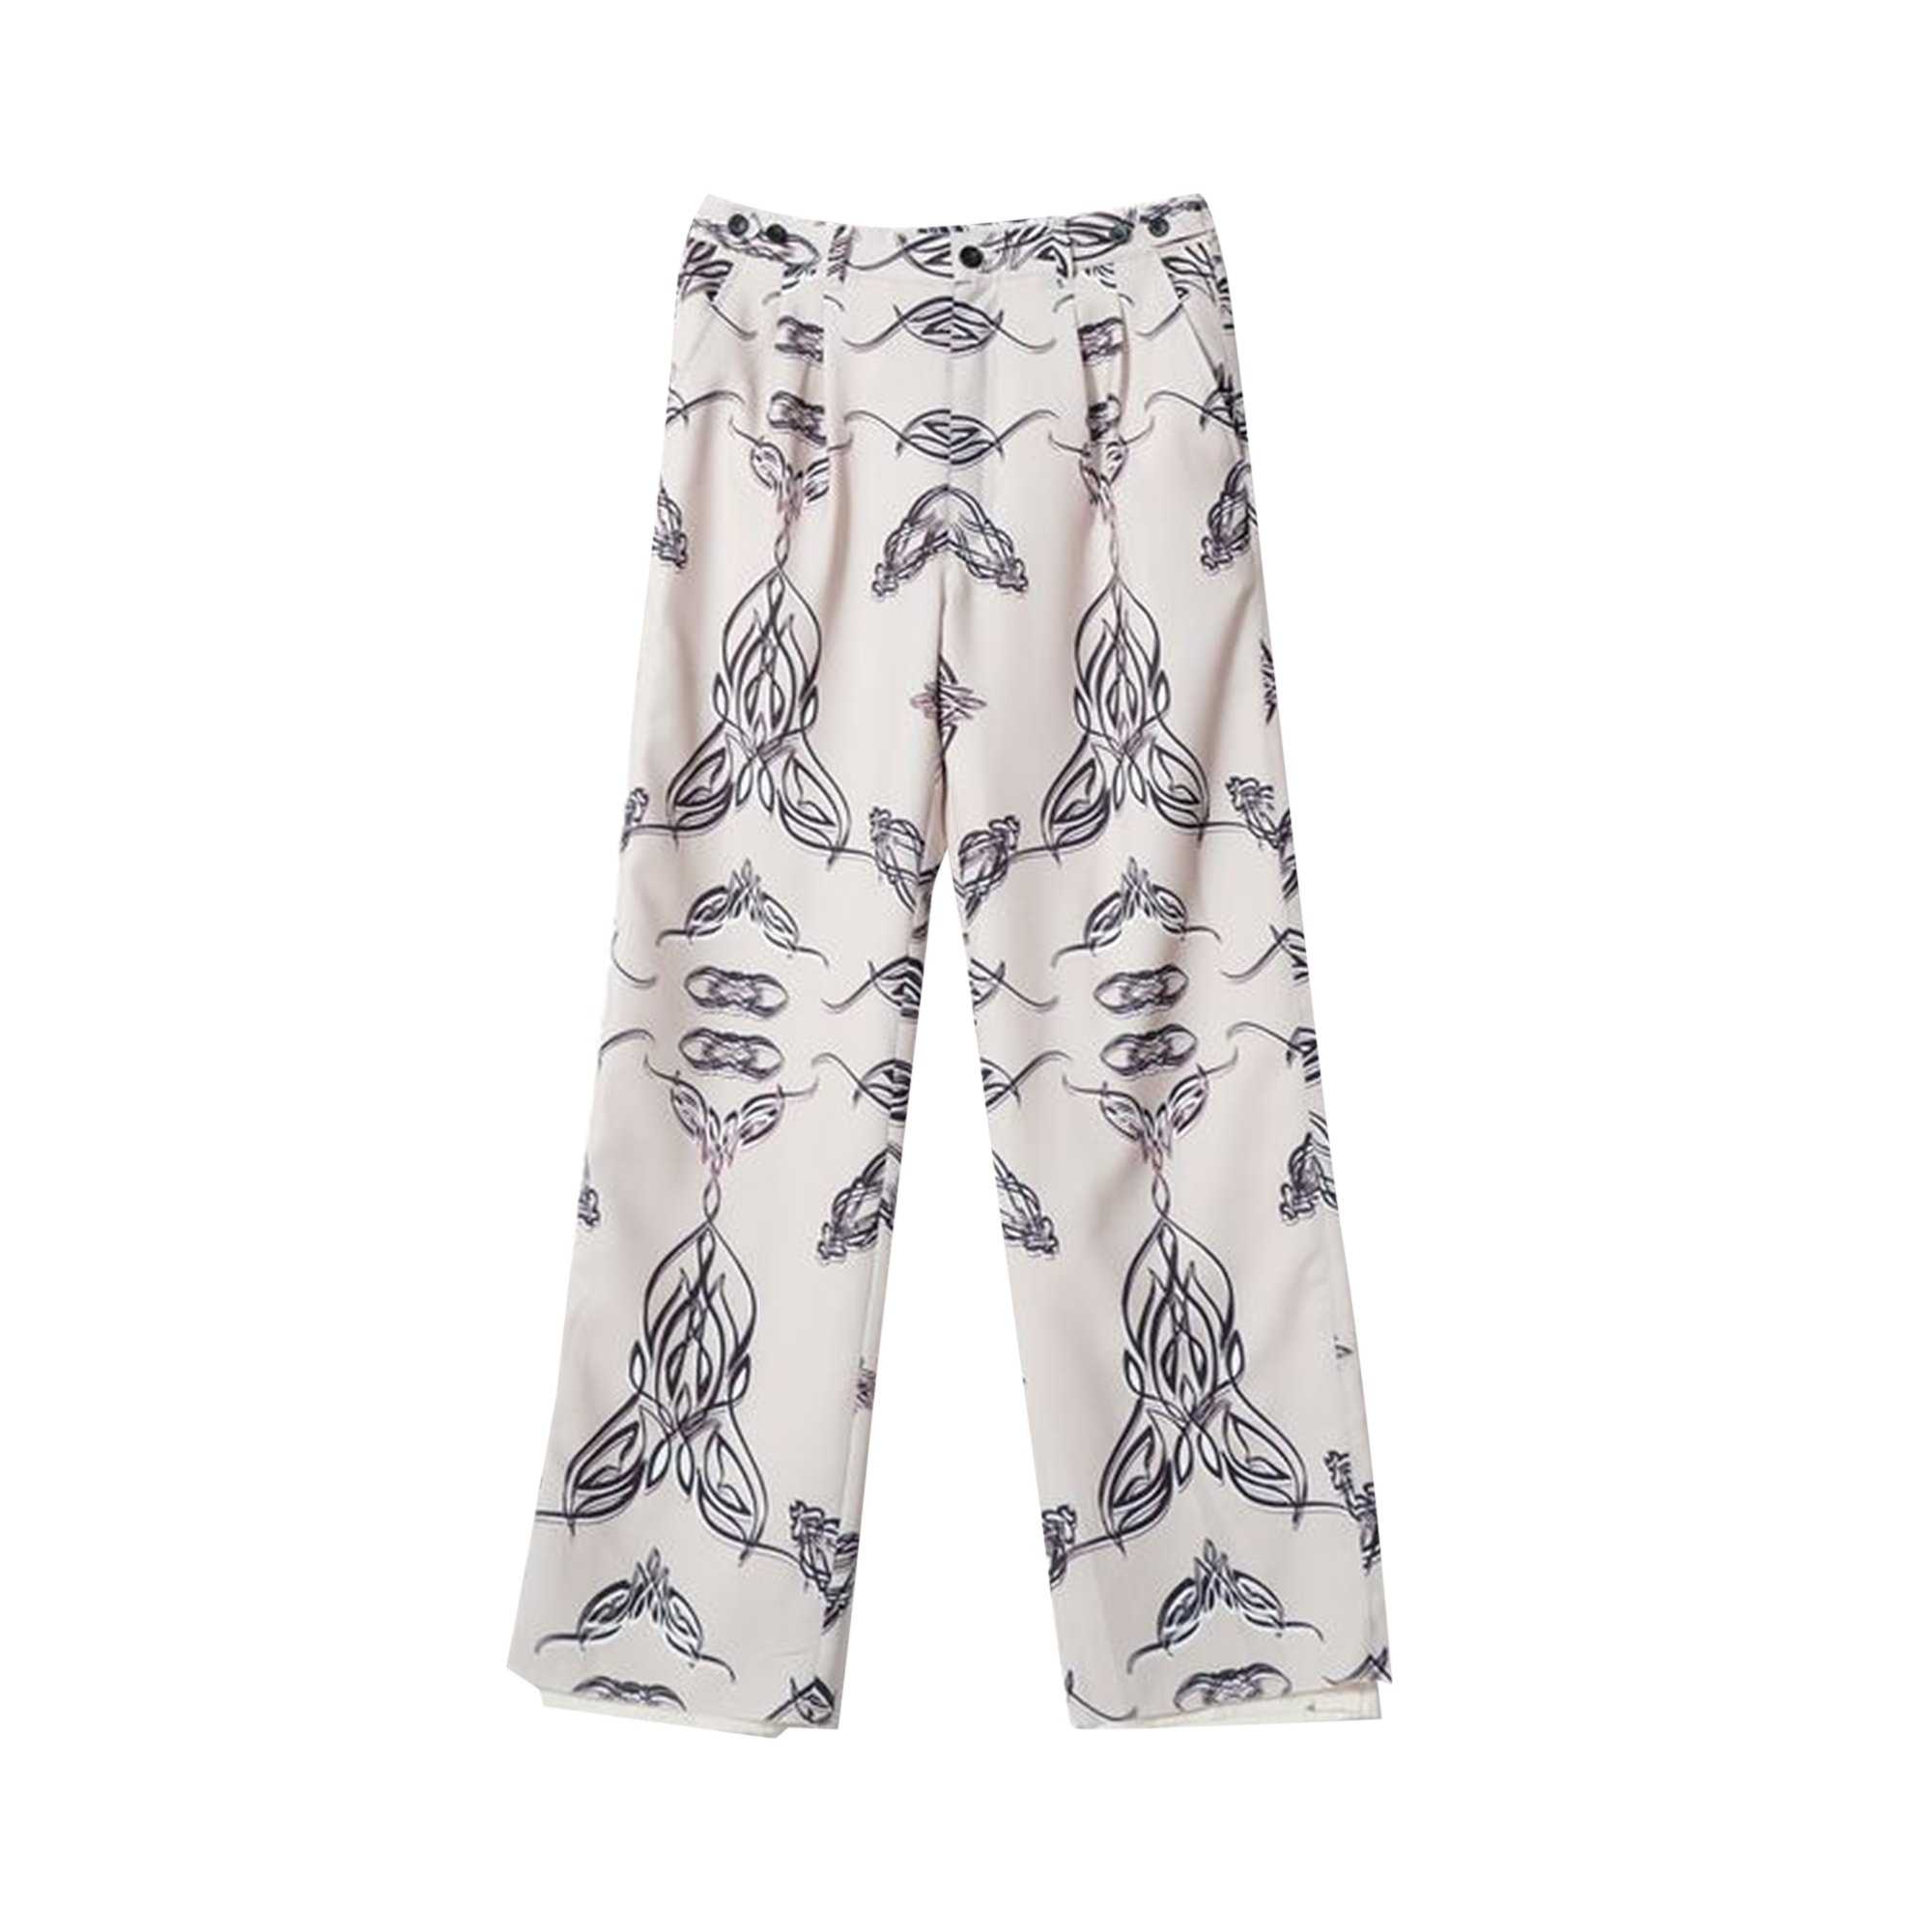 Buy Children of the Discordance Personal Data Print Trousers